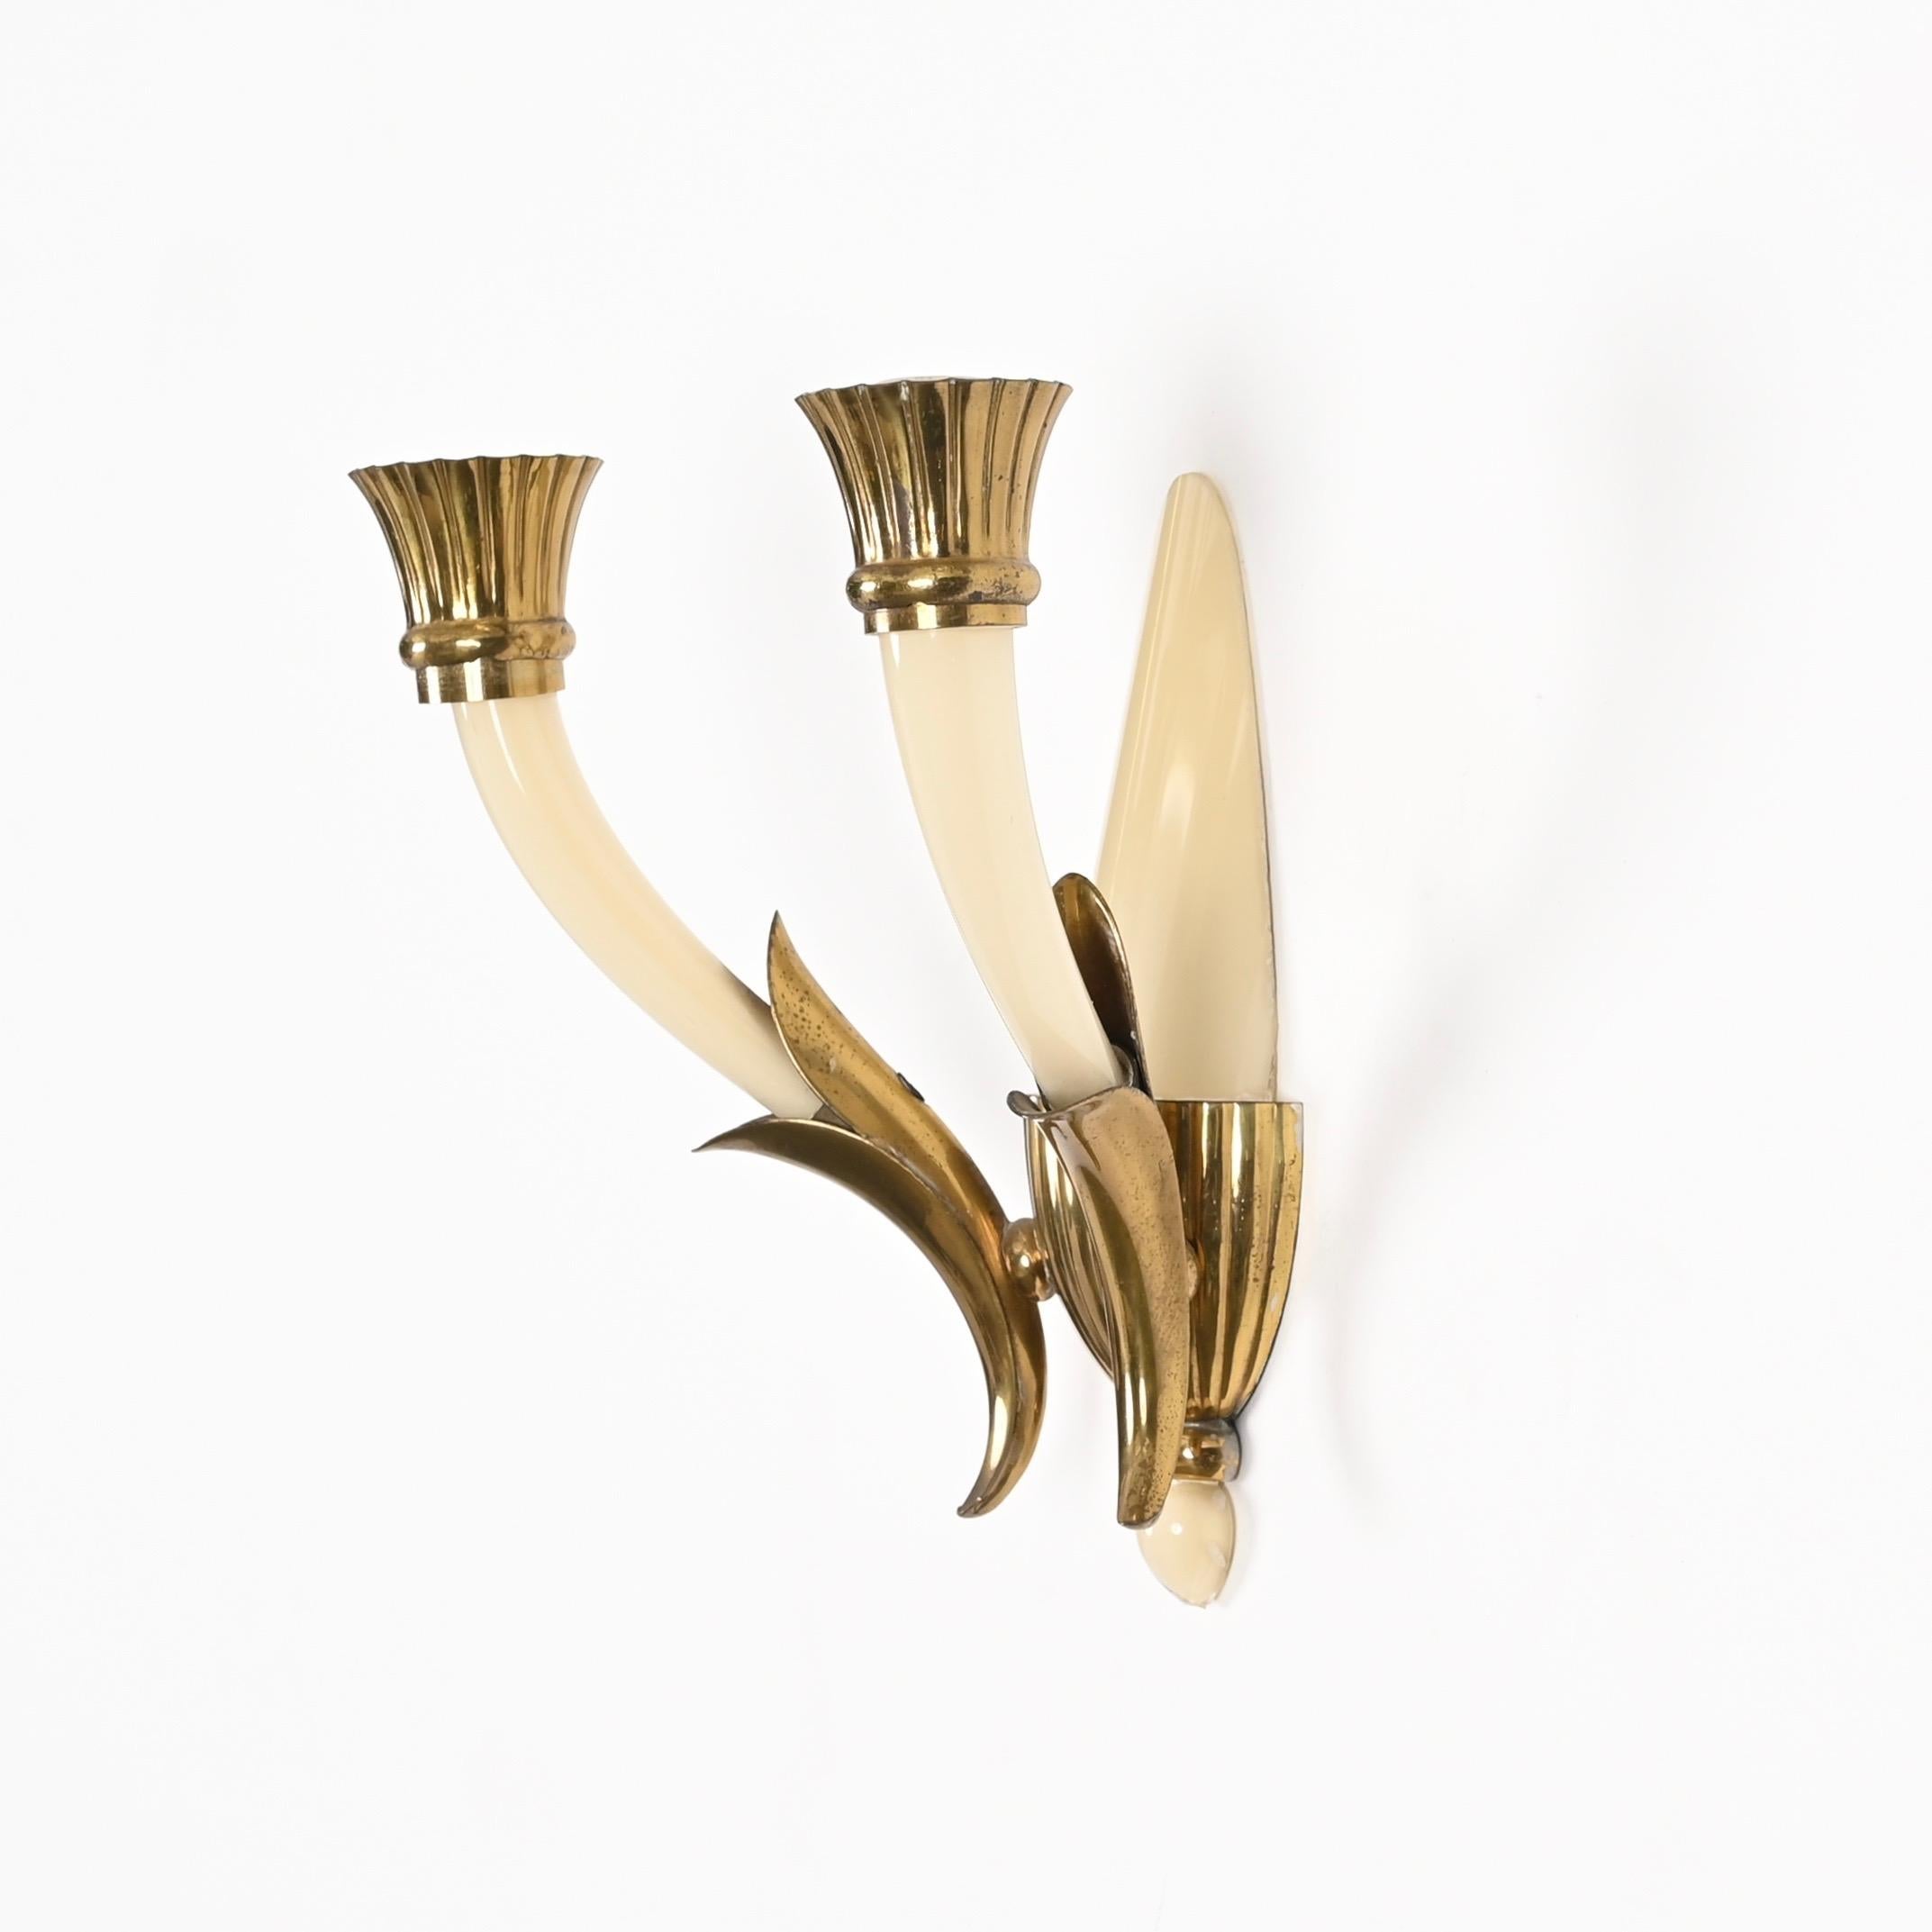 Pair of Italian Sconces in Ivory Murano Glass and Brass by Ulrich, Italy 1940s For Sale 3